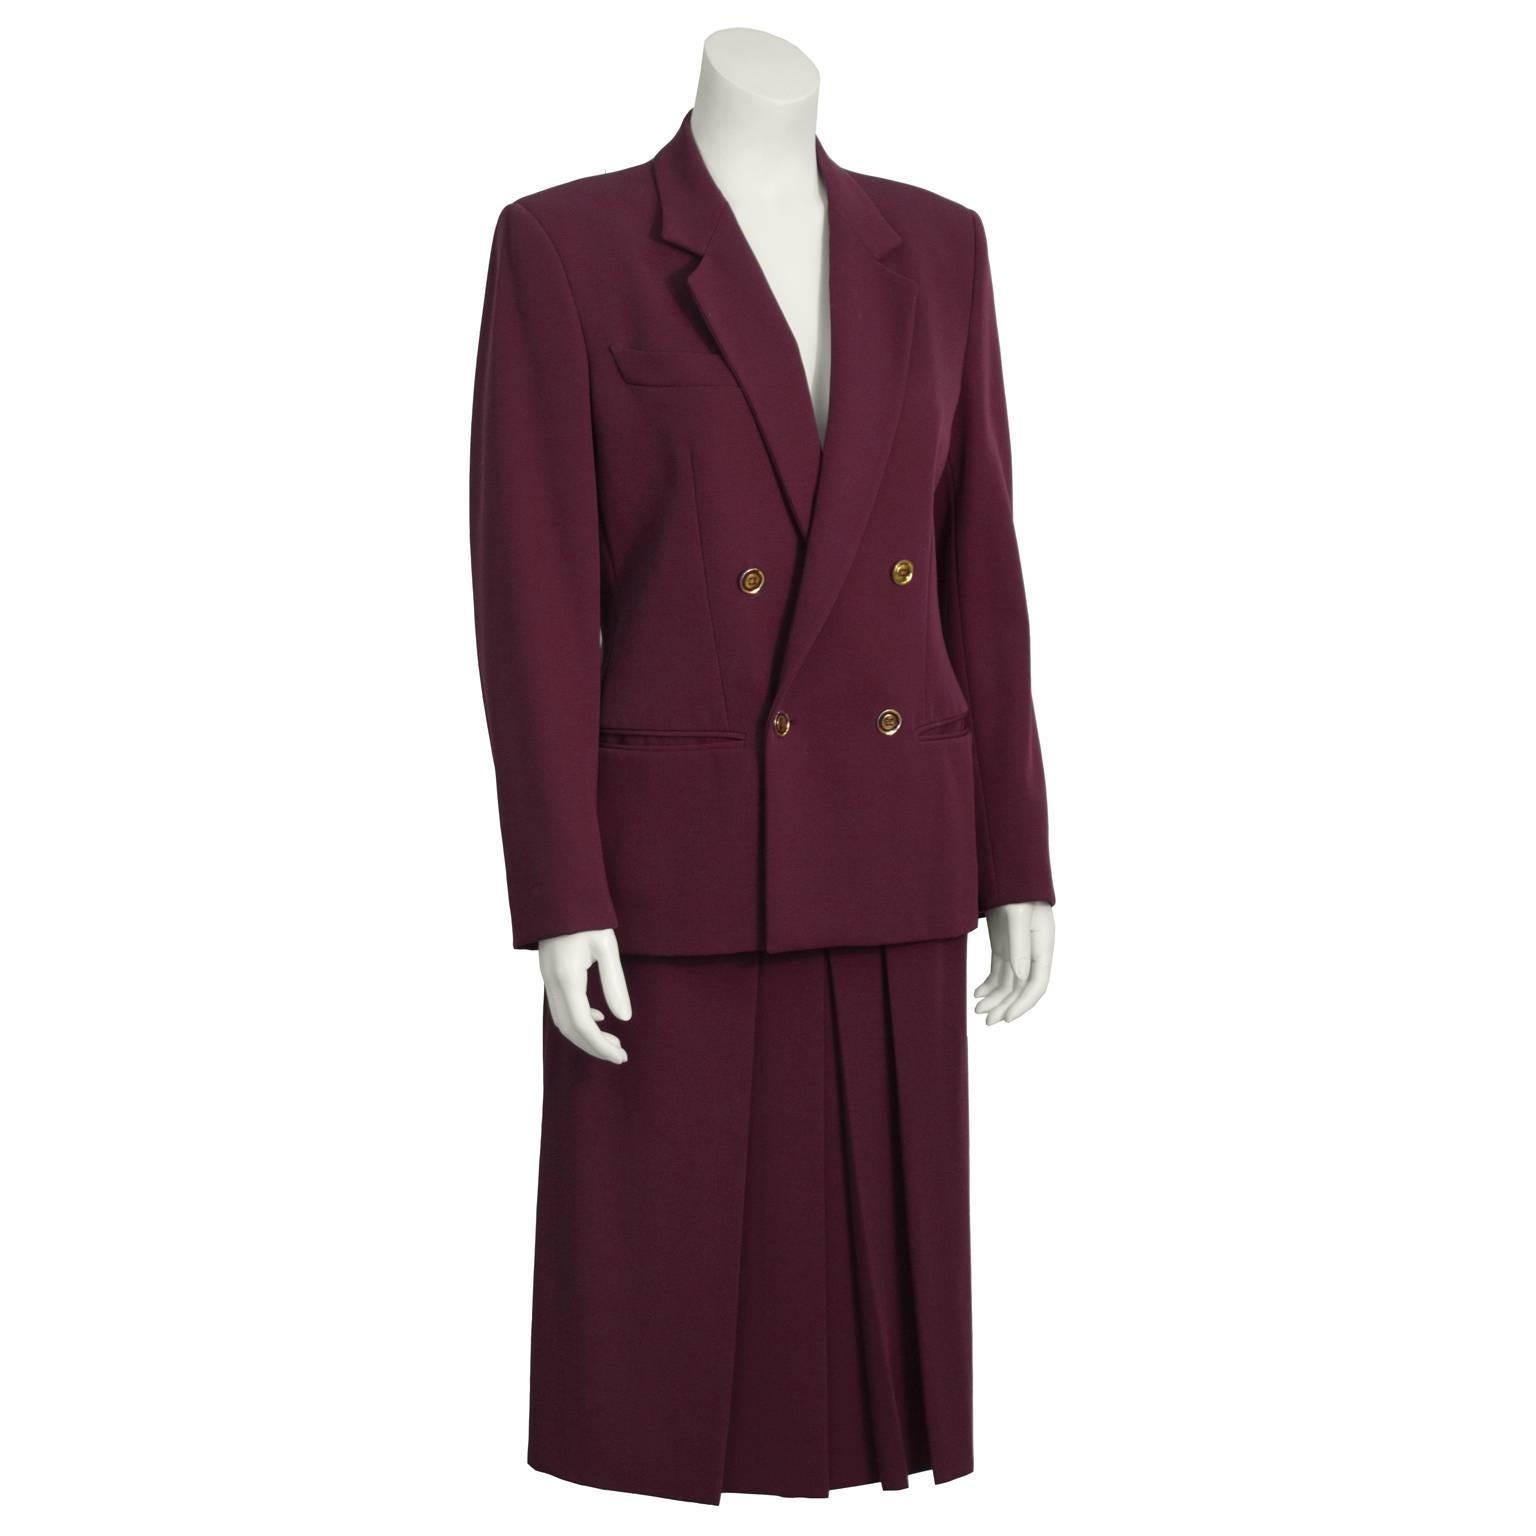 This fabulous Gucci bodeau gabardine skirt suit dates from the 1970's. Double-breasted jacket features notched lapels, a flap pocket on right breast, and two slit pockets at the hips. Box pleated knee-length skirt has four gold buttons on the front.